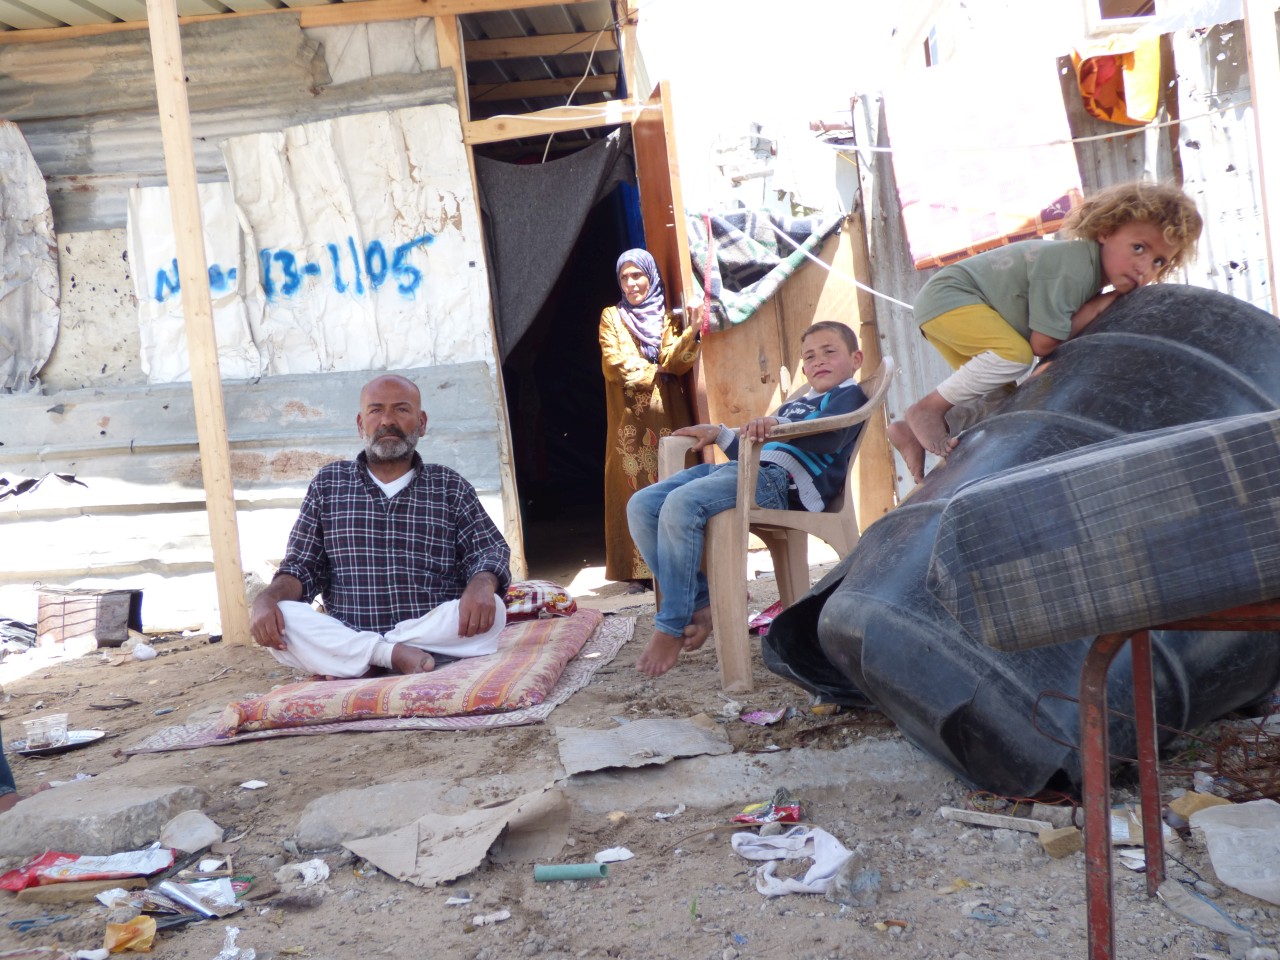 Abu Mohammad and his family next to their temporary makeshift in Beit Hanoun, May 2015. © Photo by OCHA